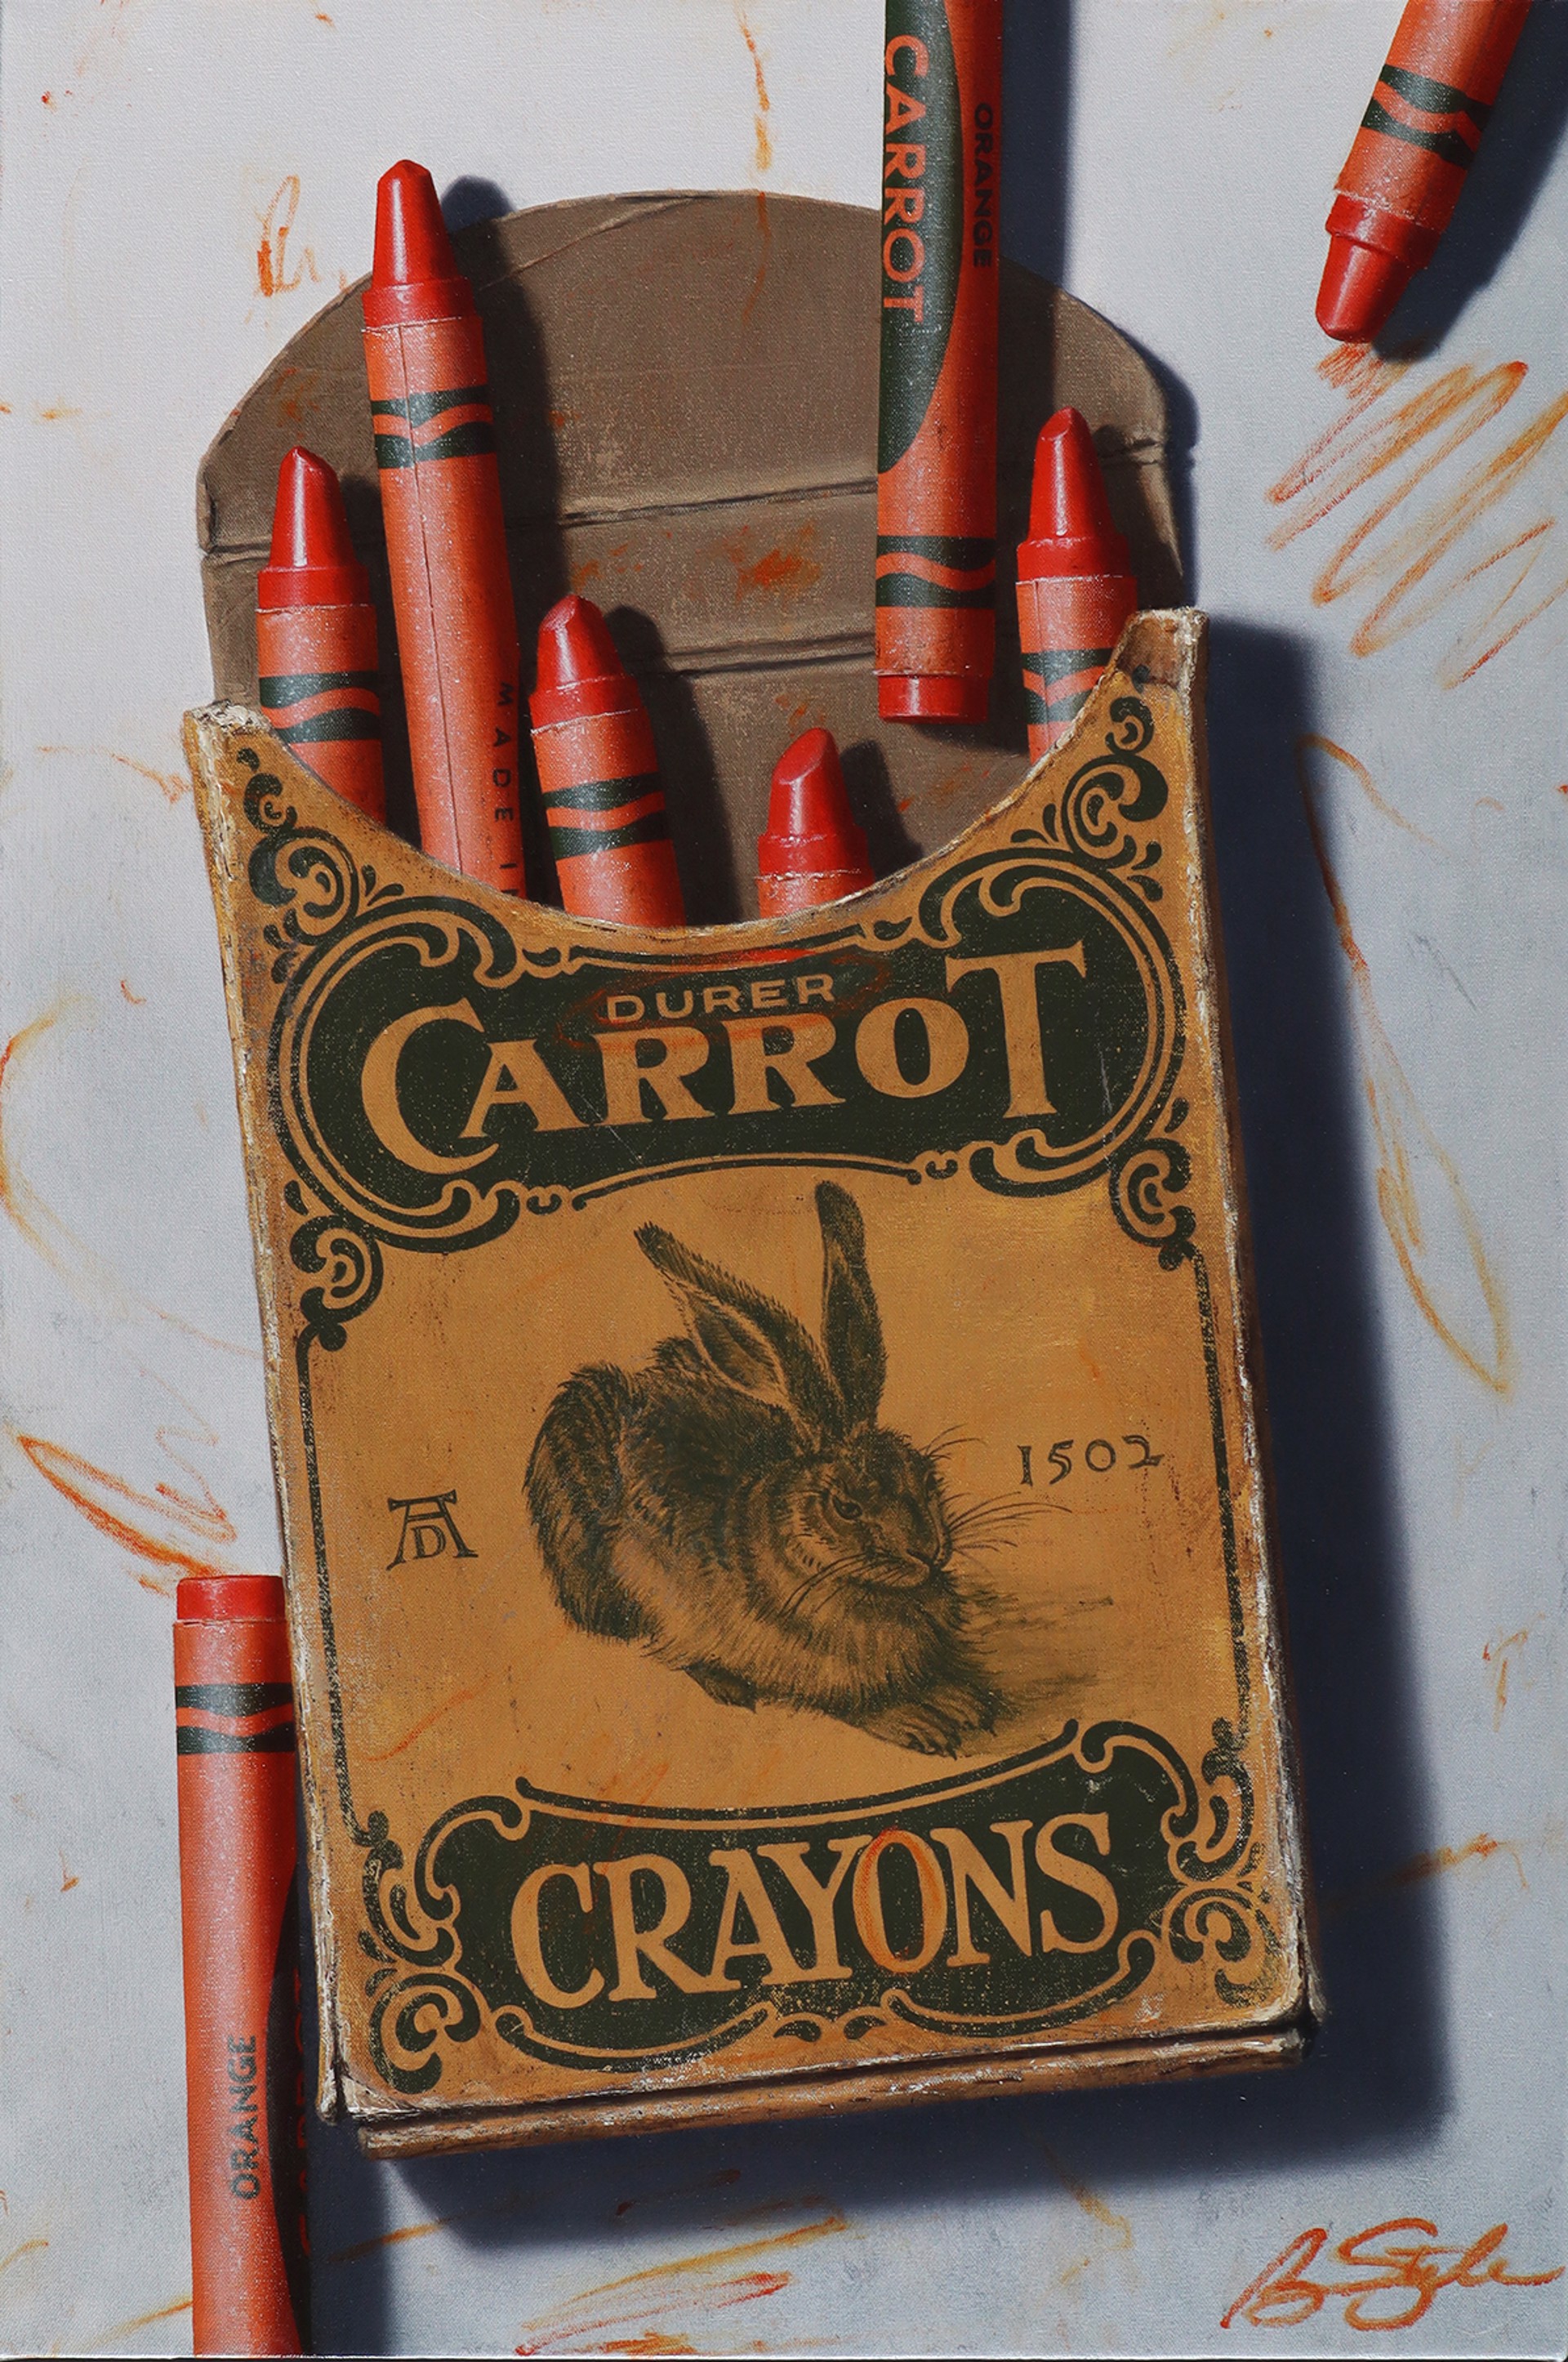 Carrot Crayons by Ben Steele